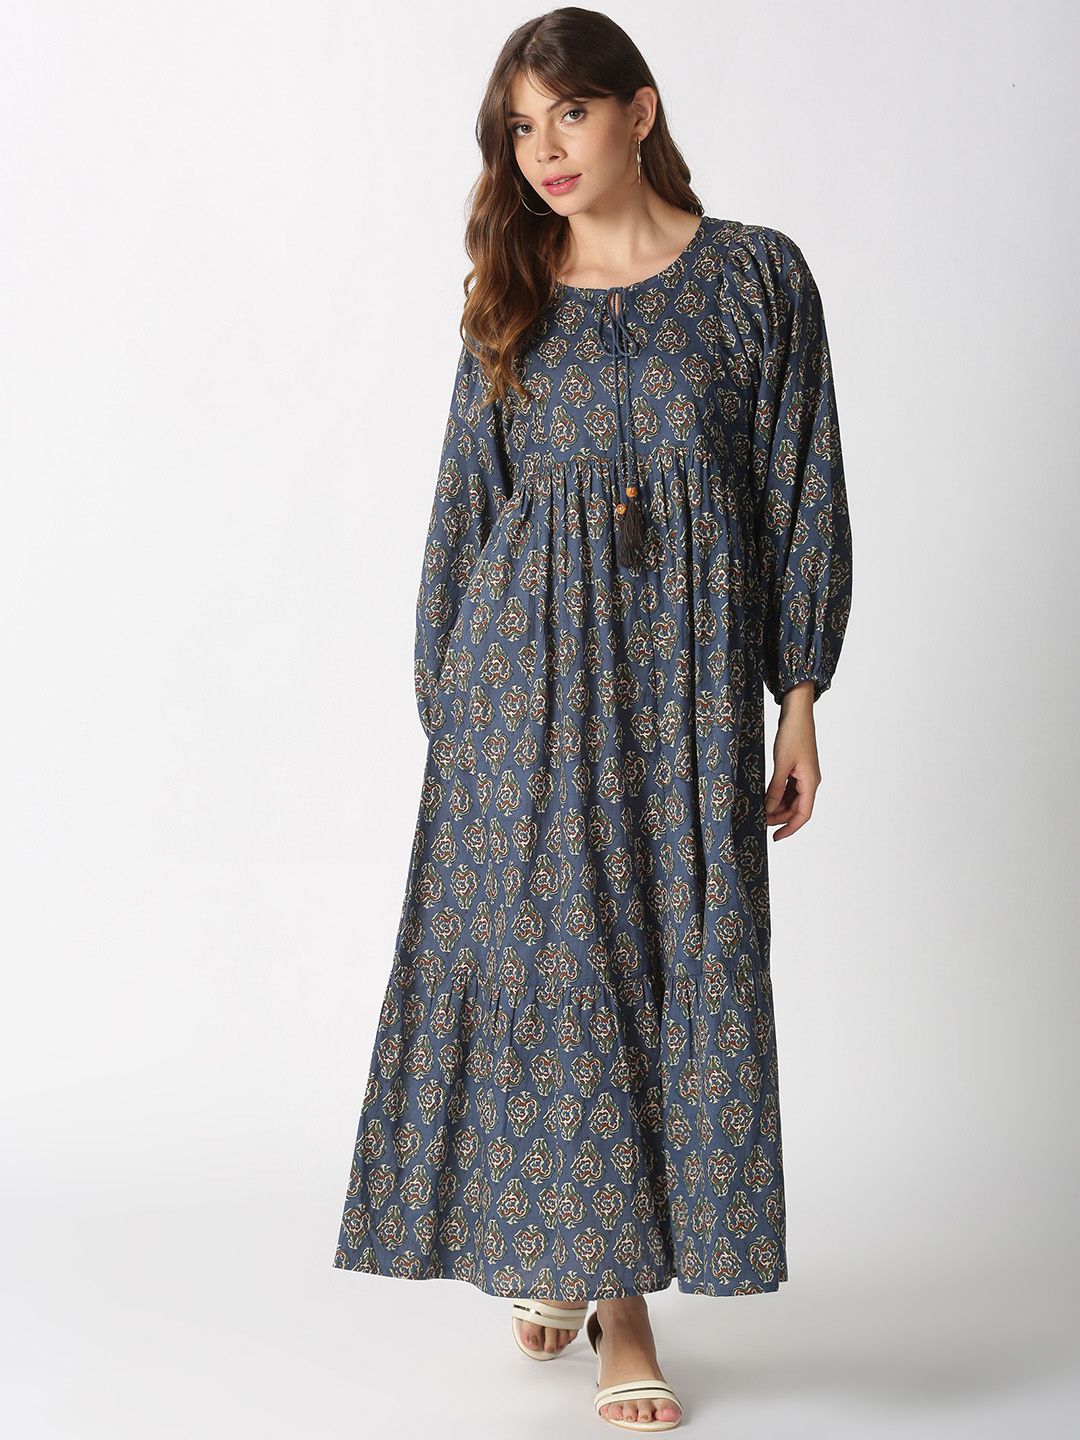 Saffron Threads Women Blue Ethnic Motifs Printed Tiered Maxi Dress with Tie-up Neck Price in India